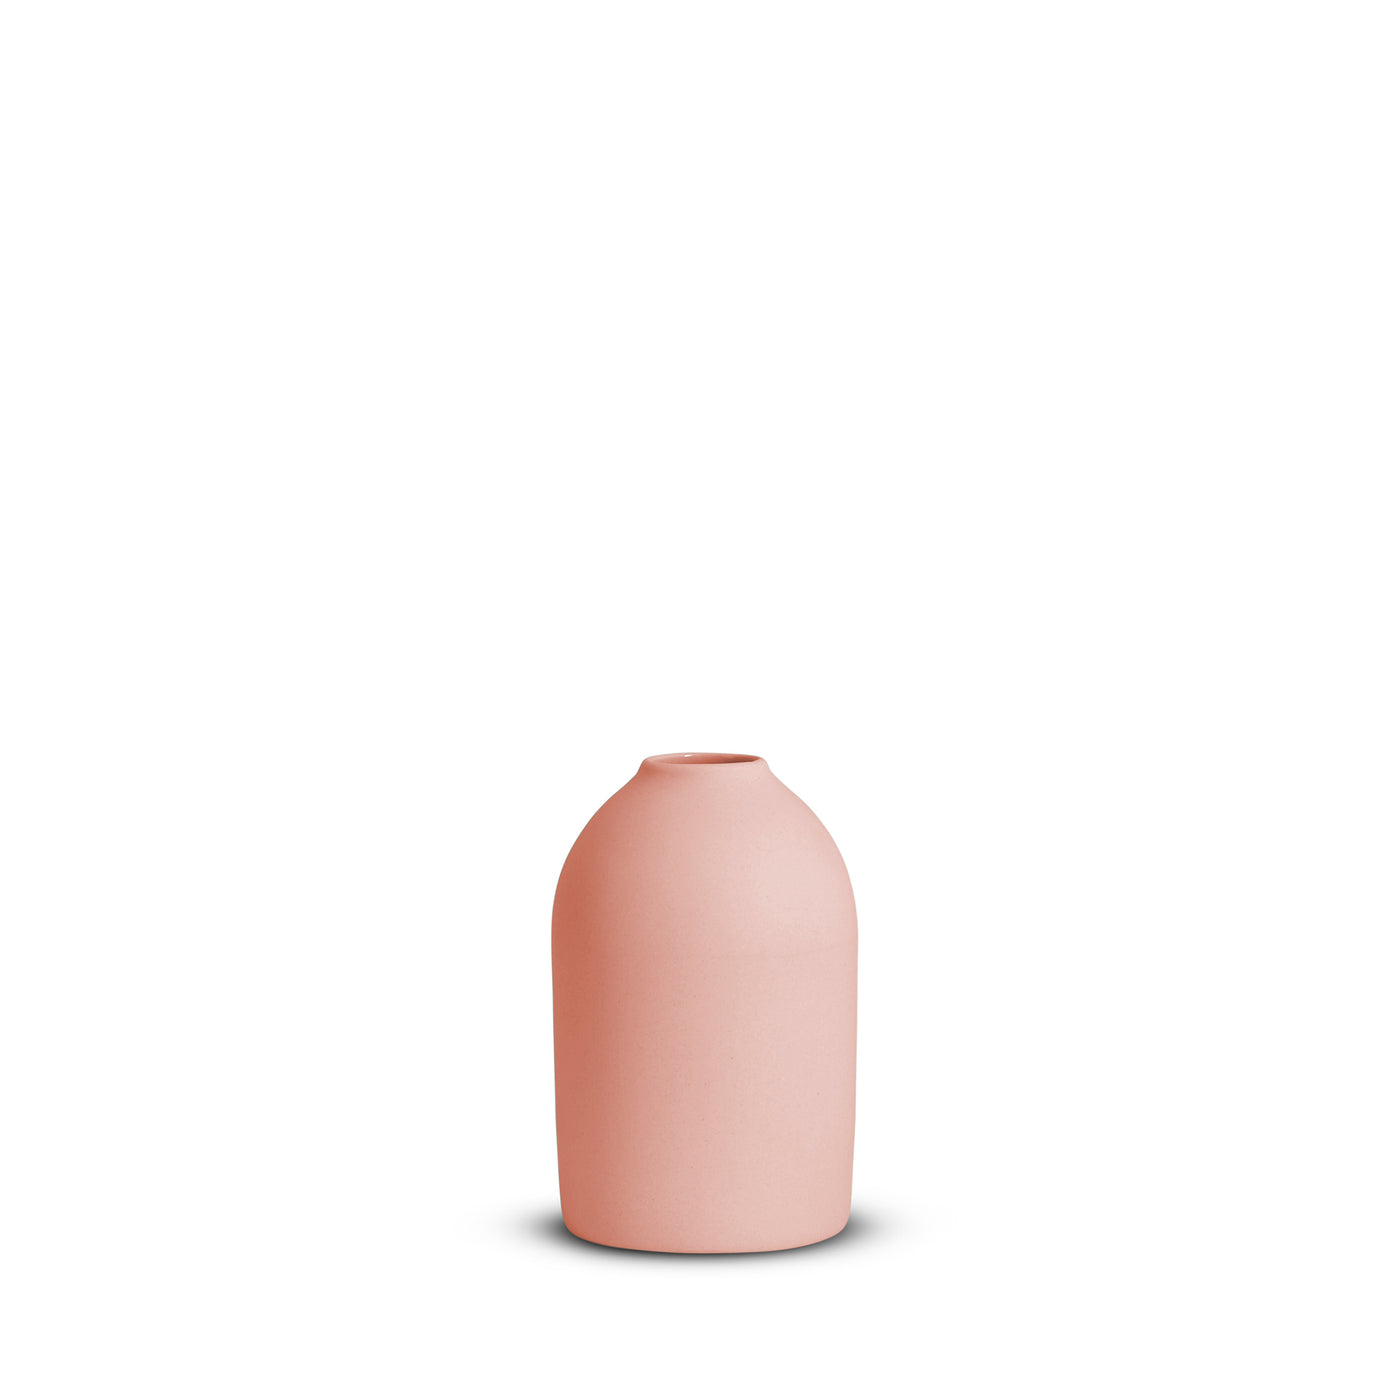 Cocoon Vase, Icy Pink, Small